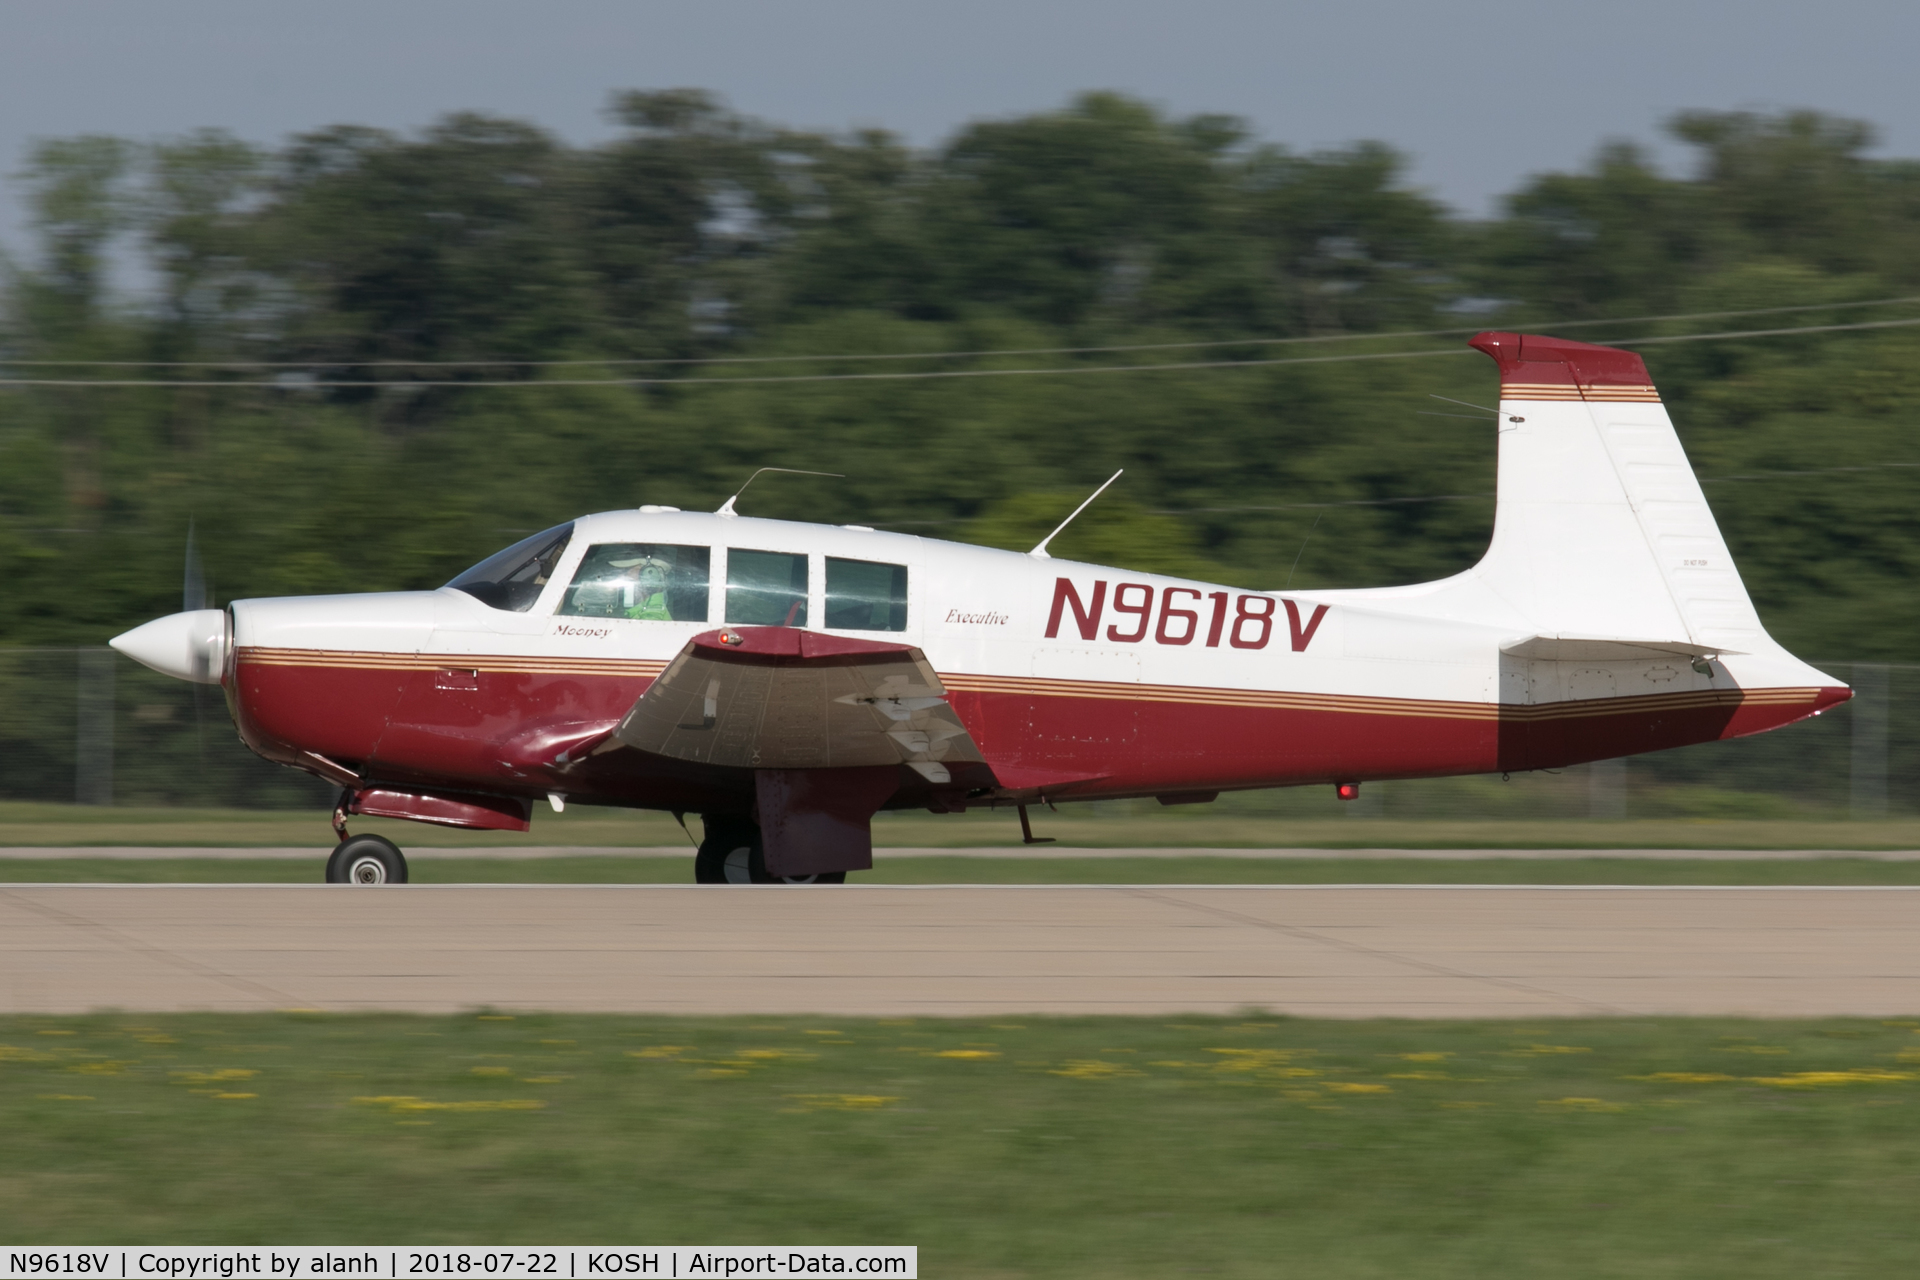 N9618V, 1971 Aerostar M-20F Aerostar 220 C/N 22-0009, Arriving at AirVenture 2018 (in company with 60 other Mooney designs)